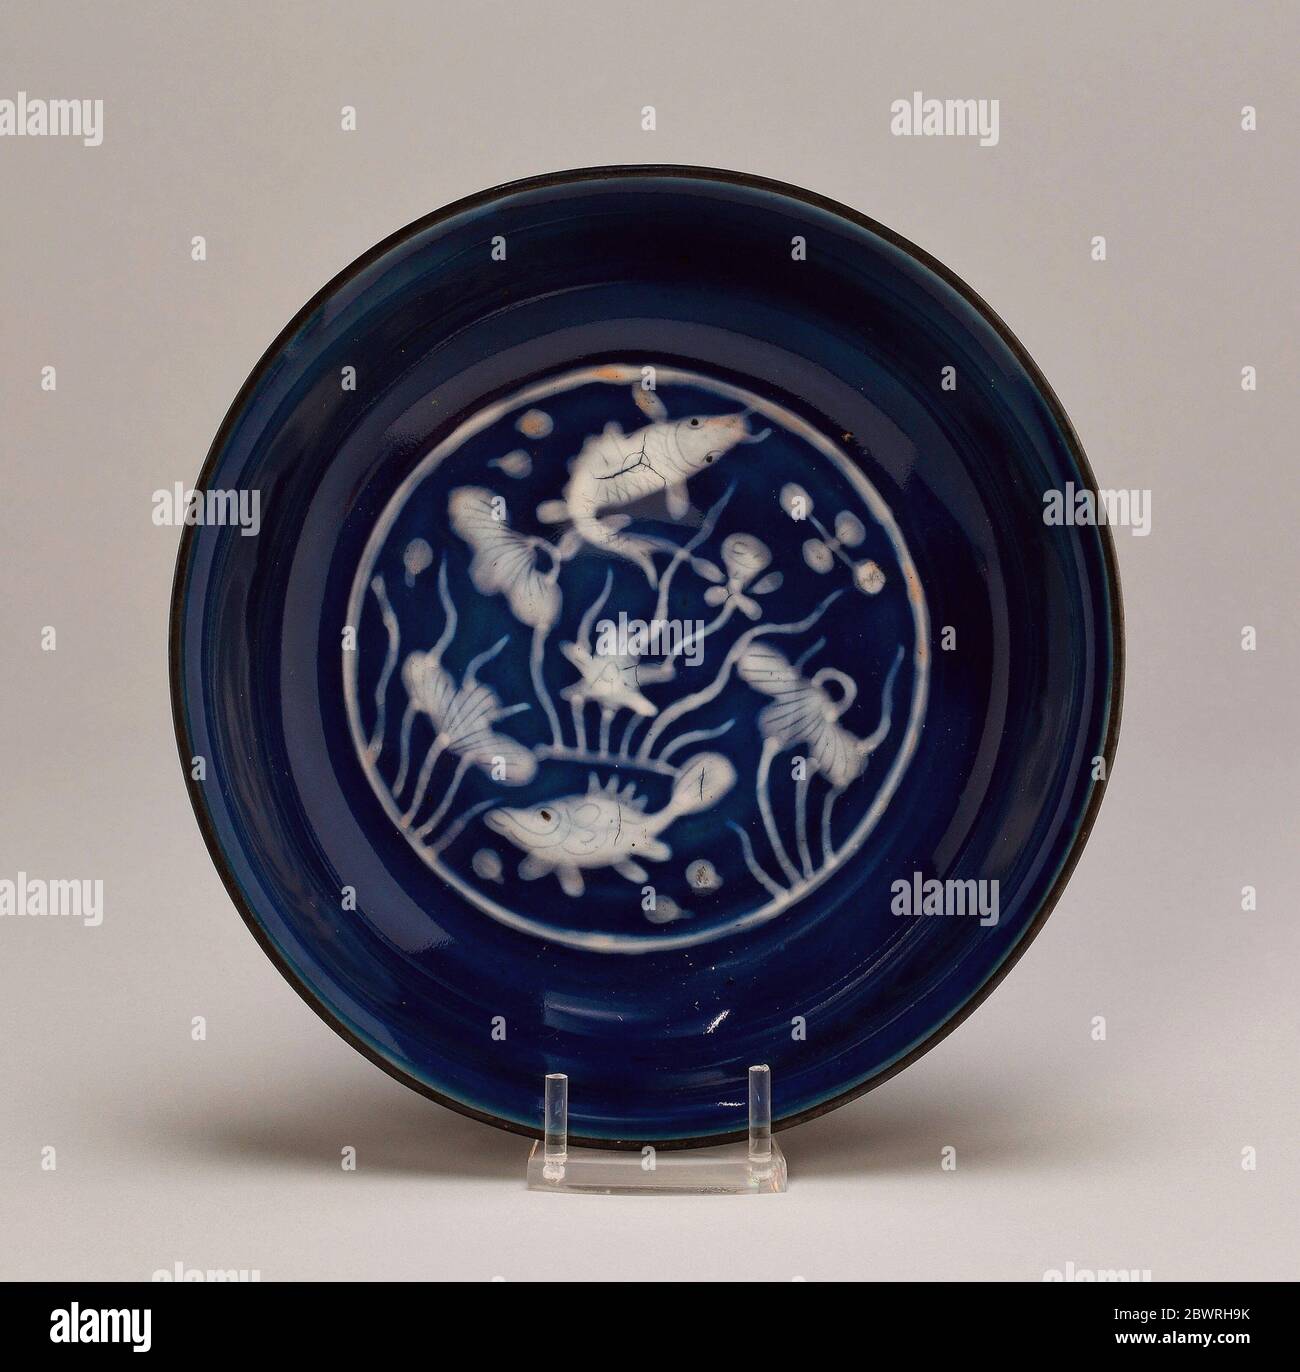 Dish with Fish Swimming in Lotus Pond - Ming dynasty (1368'1644), Wanli  reign mark and period (1573'1620) - China. Porcelain painted in underglaze  Stock Photo - Alamy